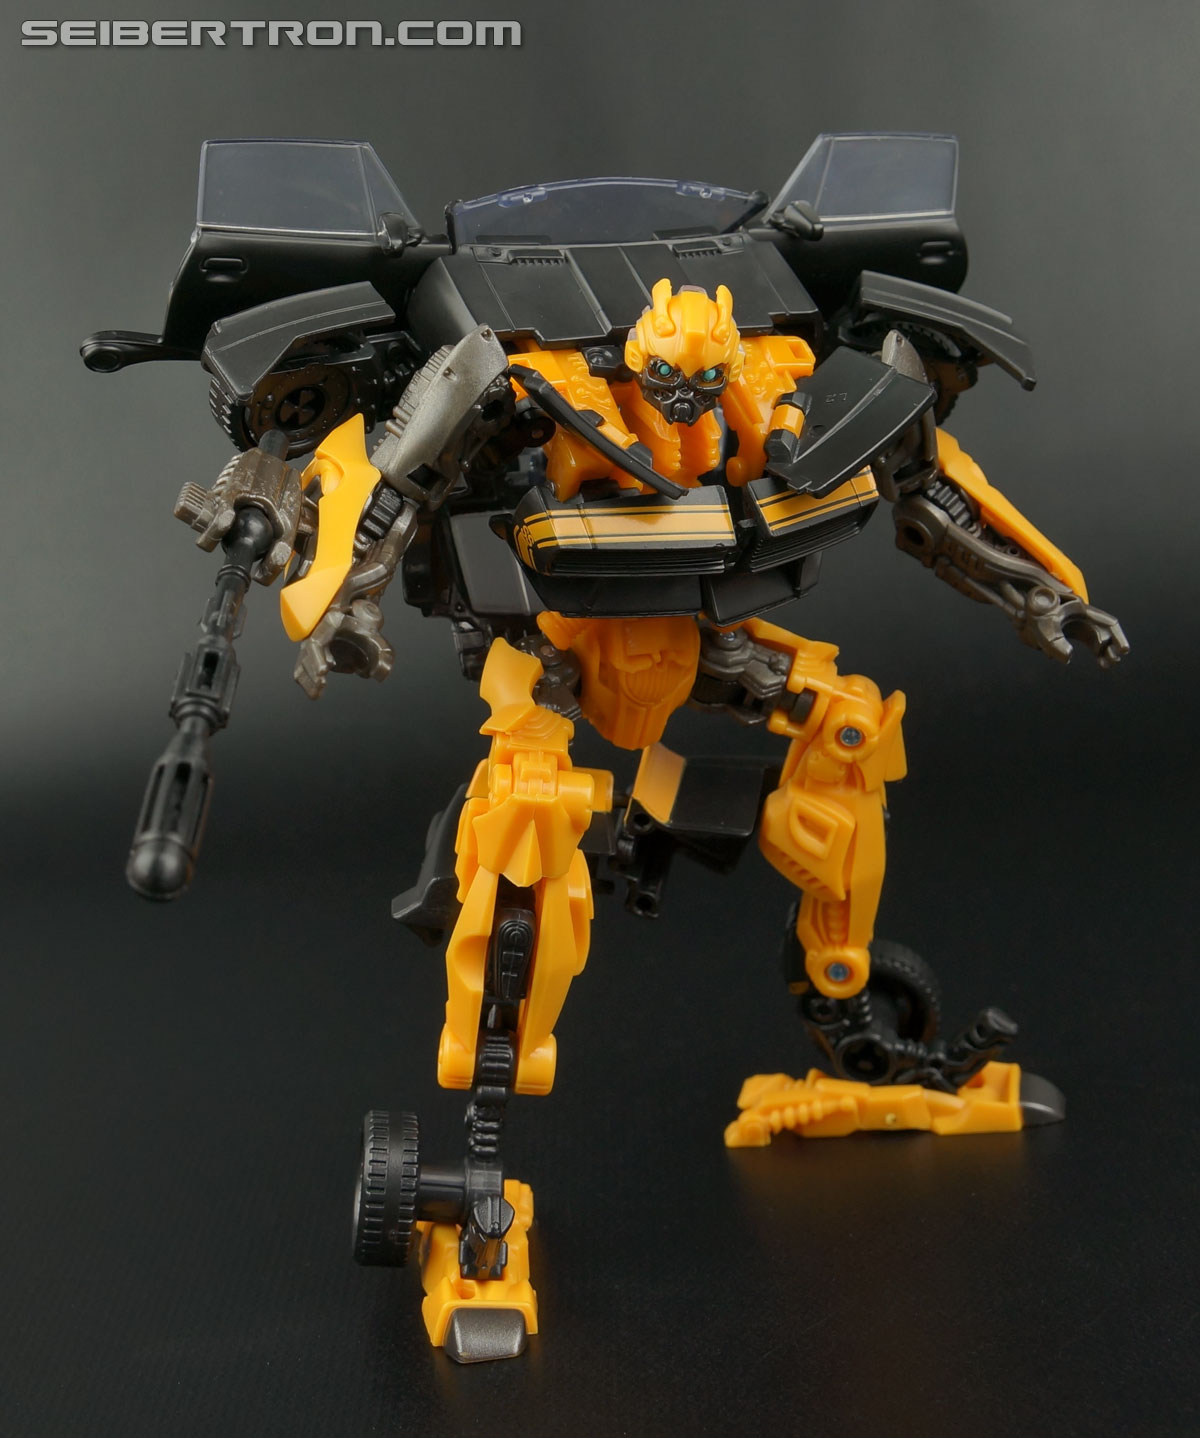 Transformers Age of Extinction: Generations High Octane Bumblebee (Image #121 of 178)